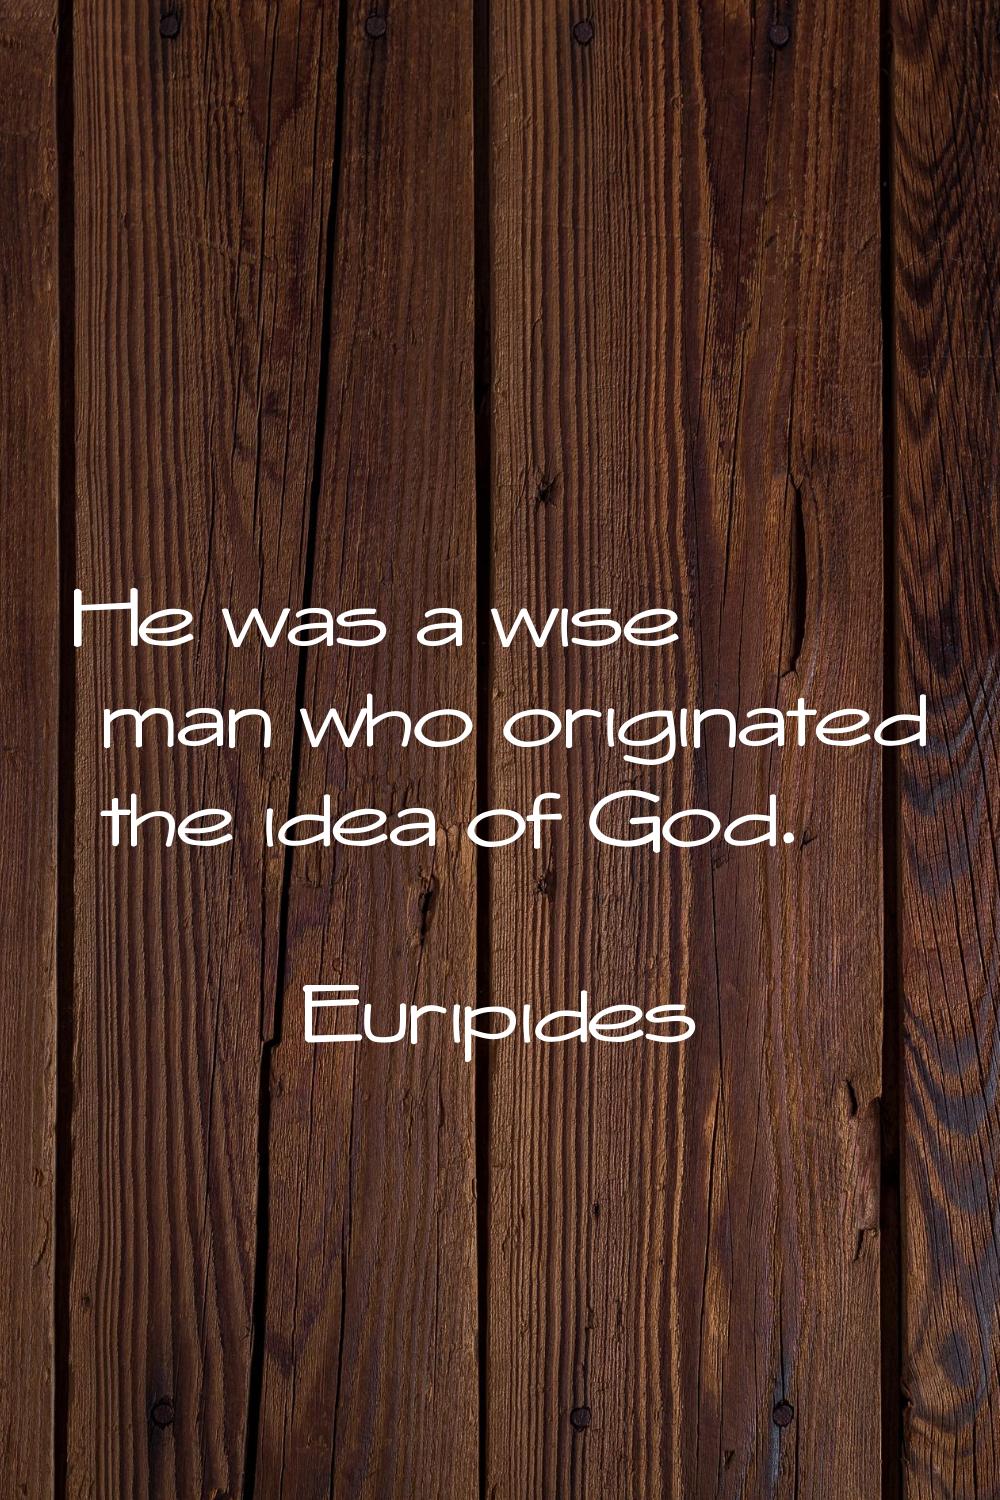 He was a wise man who originated the idea of God.